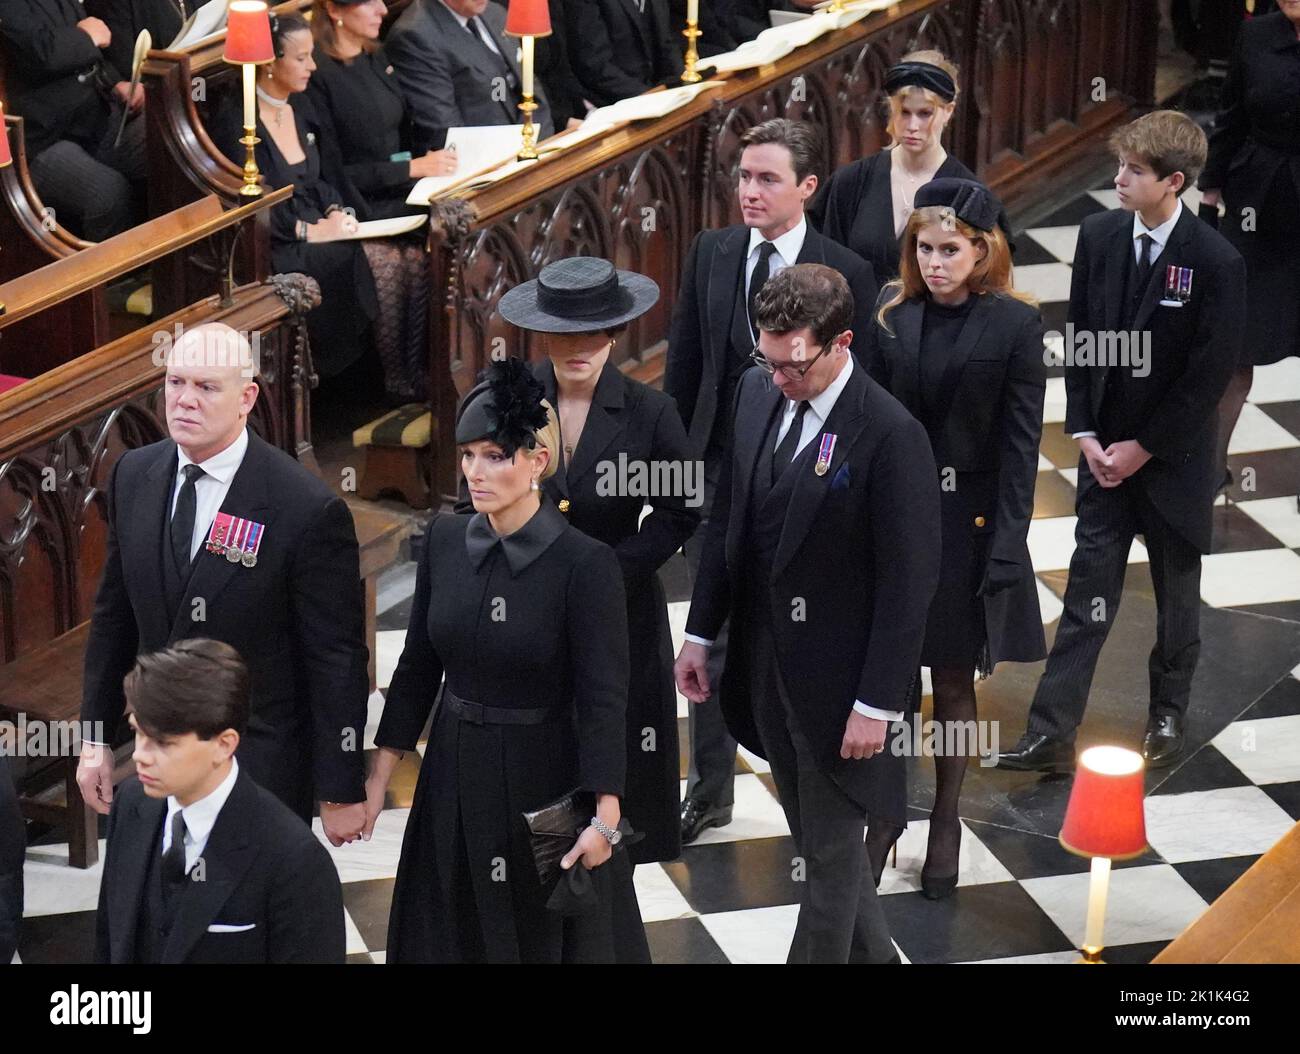 Members of the royal family (left to right, from front) Arthur Chatto and Daniel Chatto, Mike Tindall and Zara Tindall, Princess Eugenie and Jack Brooksbank , Princess Beatrice and Edoardo Mapelli Mozzi, Lady Louise Windsor and James, Viscount Severn arriving at the State Funeral of Queen Elizabeth II, held at Westminster Abbey, London. Picture date: Monday September 19, 2022. Stock Photo